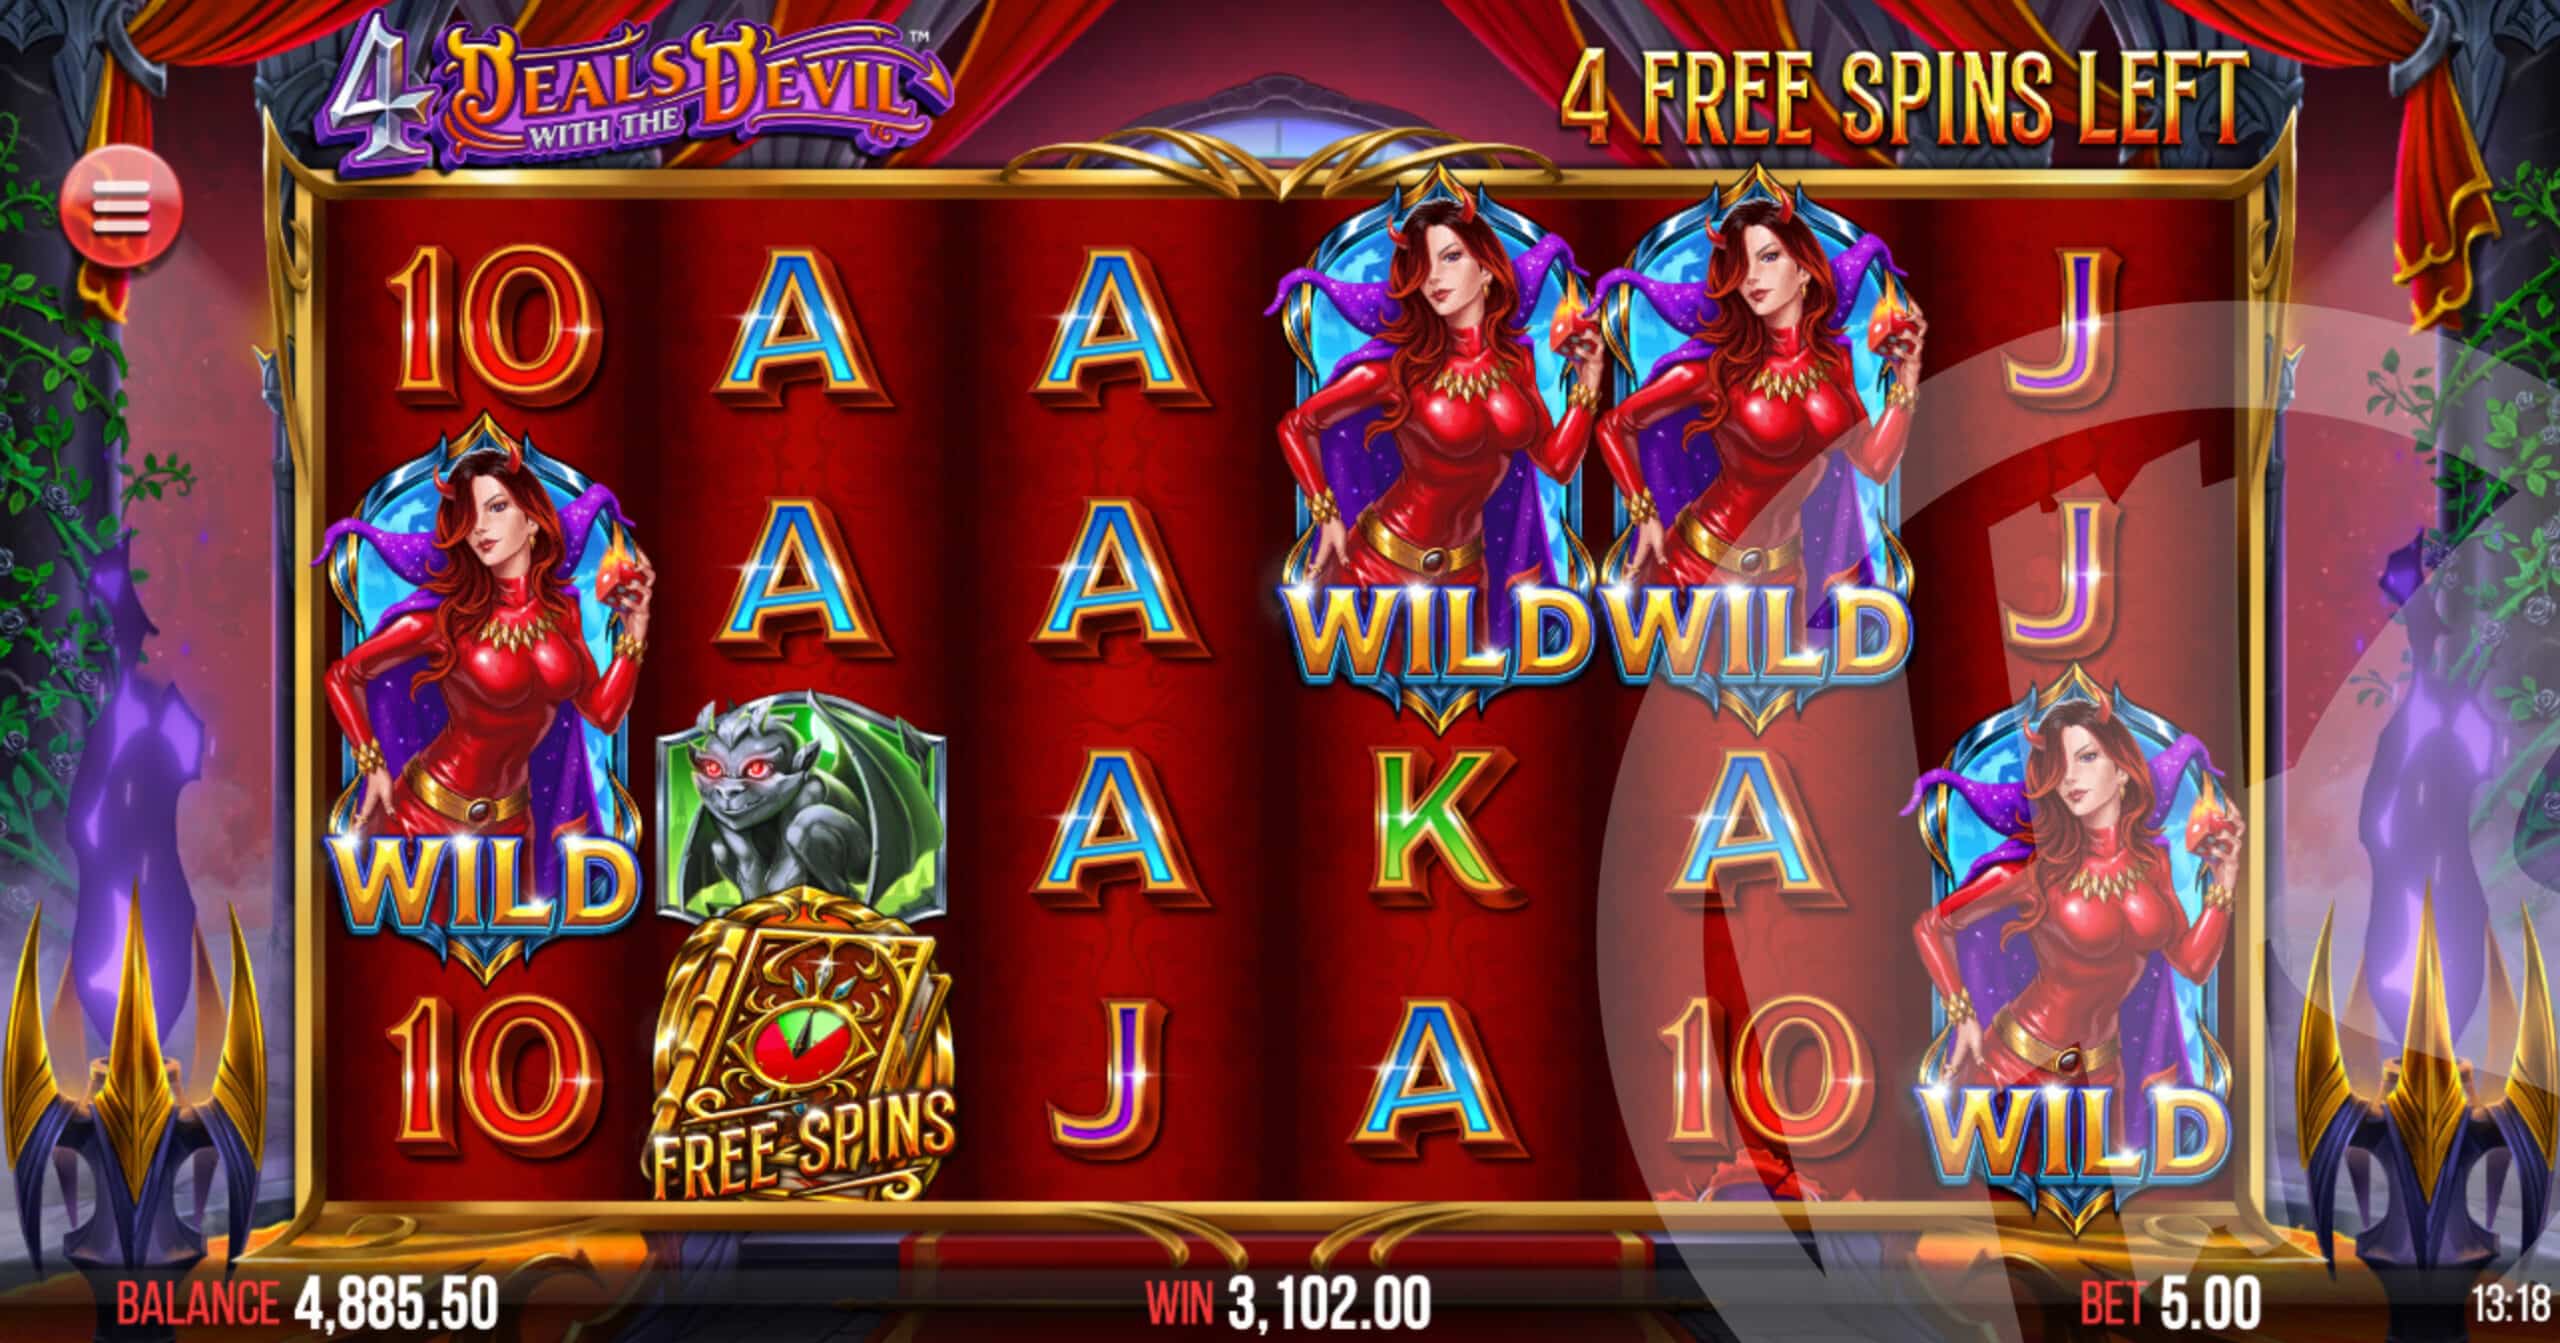 4 Deals With The Devil Xtra Hot Free Spins